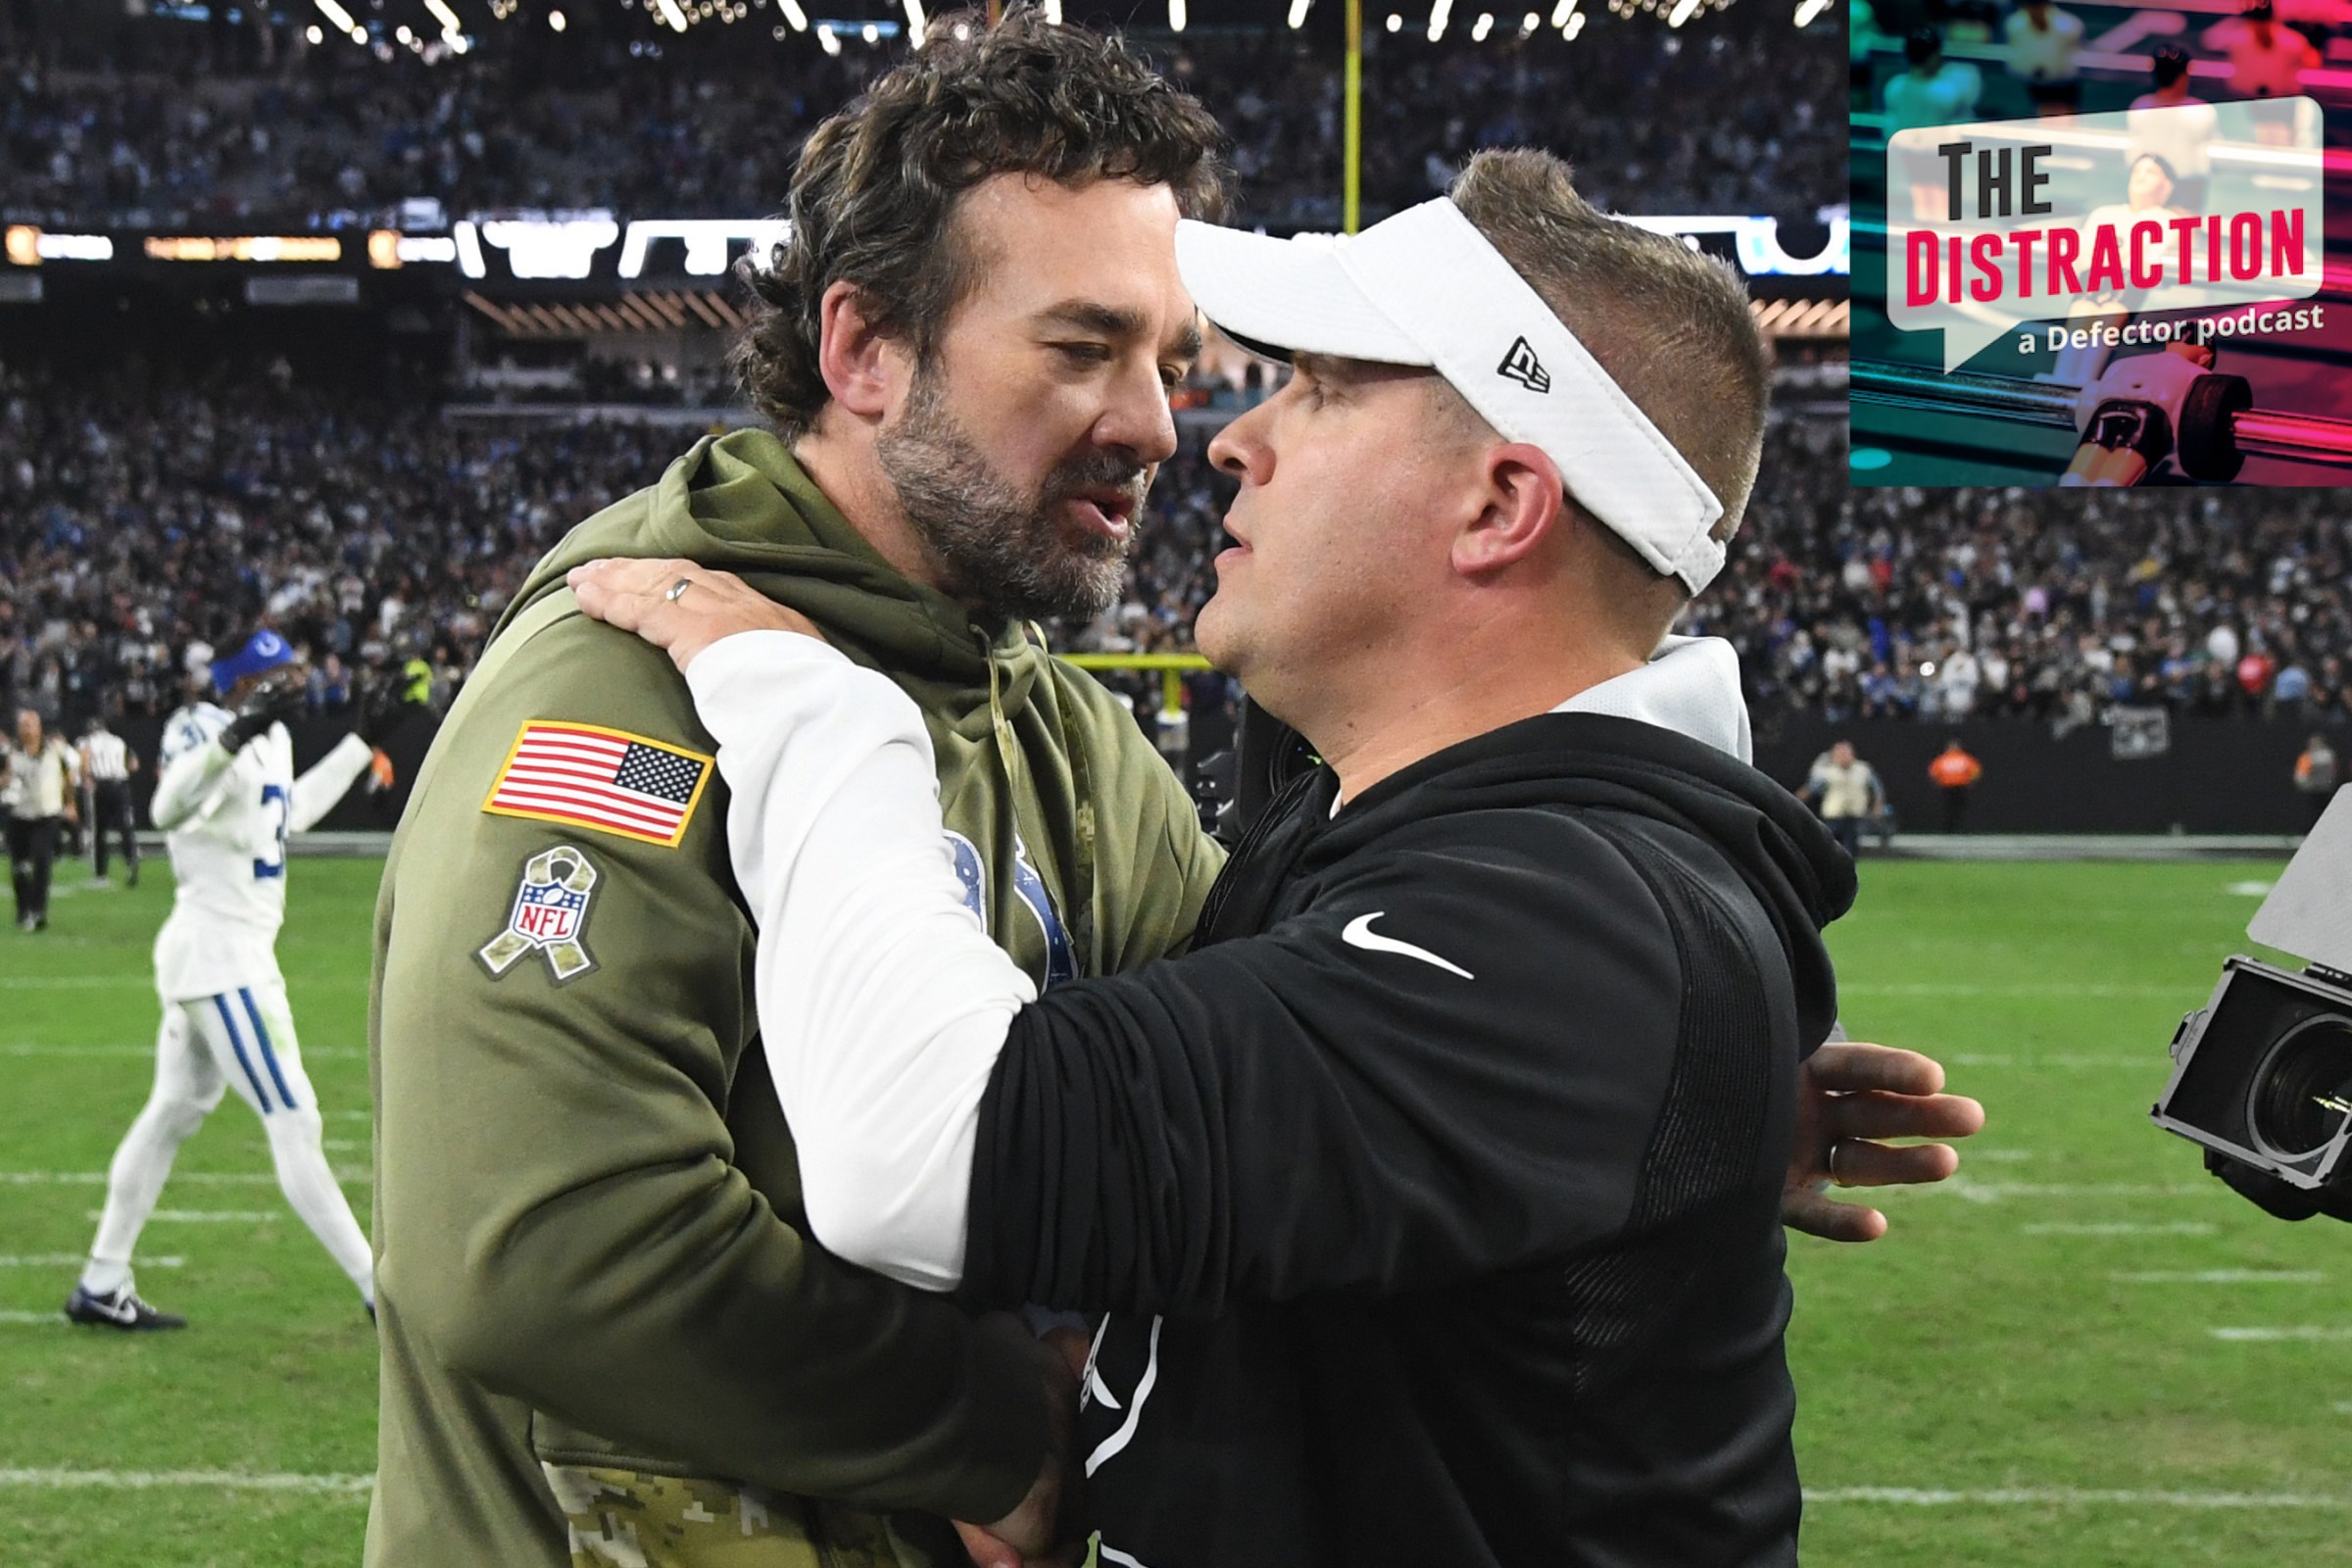 Colts coach Jeff Saturday and Raiders coach Josh McDaniels congratulate each other after their awful NFL teams played each other.